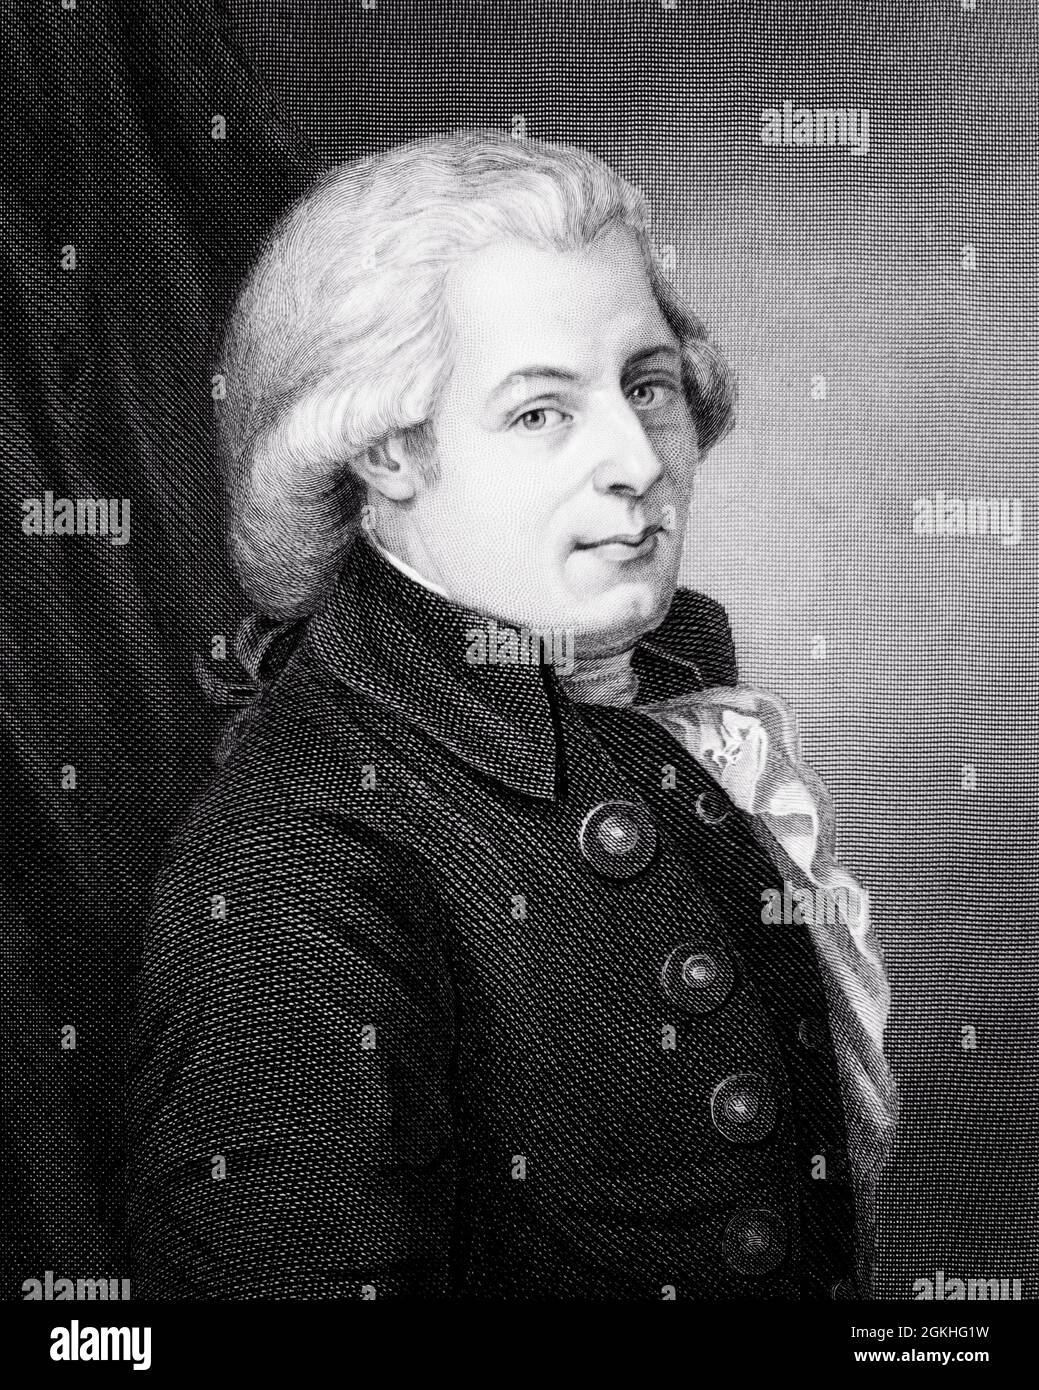 1770s 1780s PORTRAIT OF GREAT AUSTRIAN COMPOSER WOLFGANG AMADEUS MOZART LOOKING AT CAMERA - q53149 CPC001 HARS HOLY ROMAN EMPIRE MID-ADULT MID-ADULT MAN MOZART REQUIEM SALZBURG VIENNA WOLFGANG AMADEUS MOZART 1780s BLACK AND WHITE CAUCASIAN ETHNICITY OLD FASHIONED Stock Photo